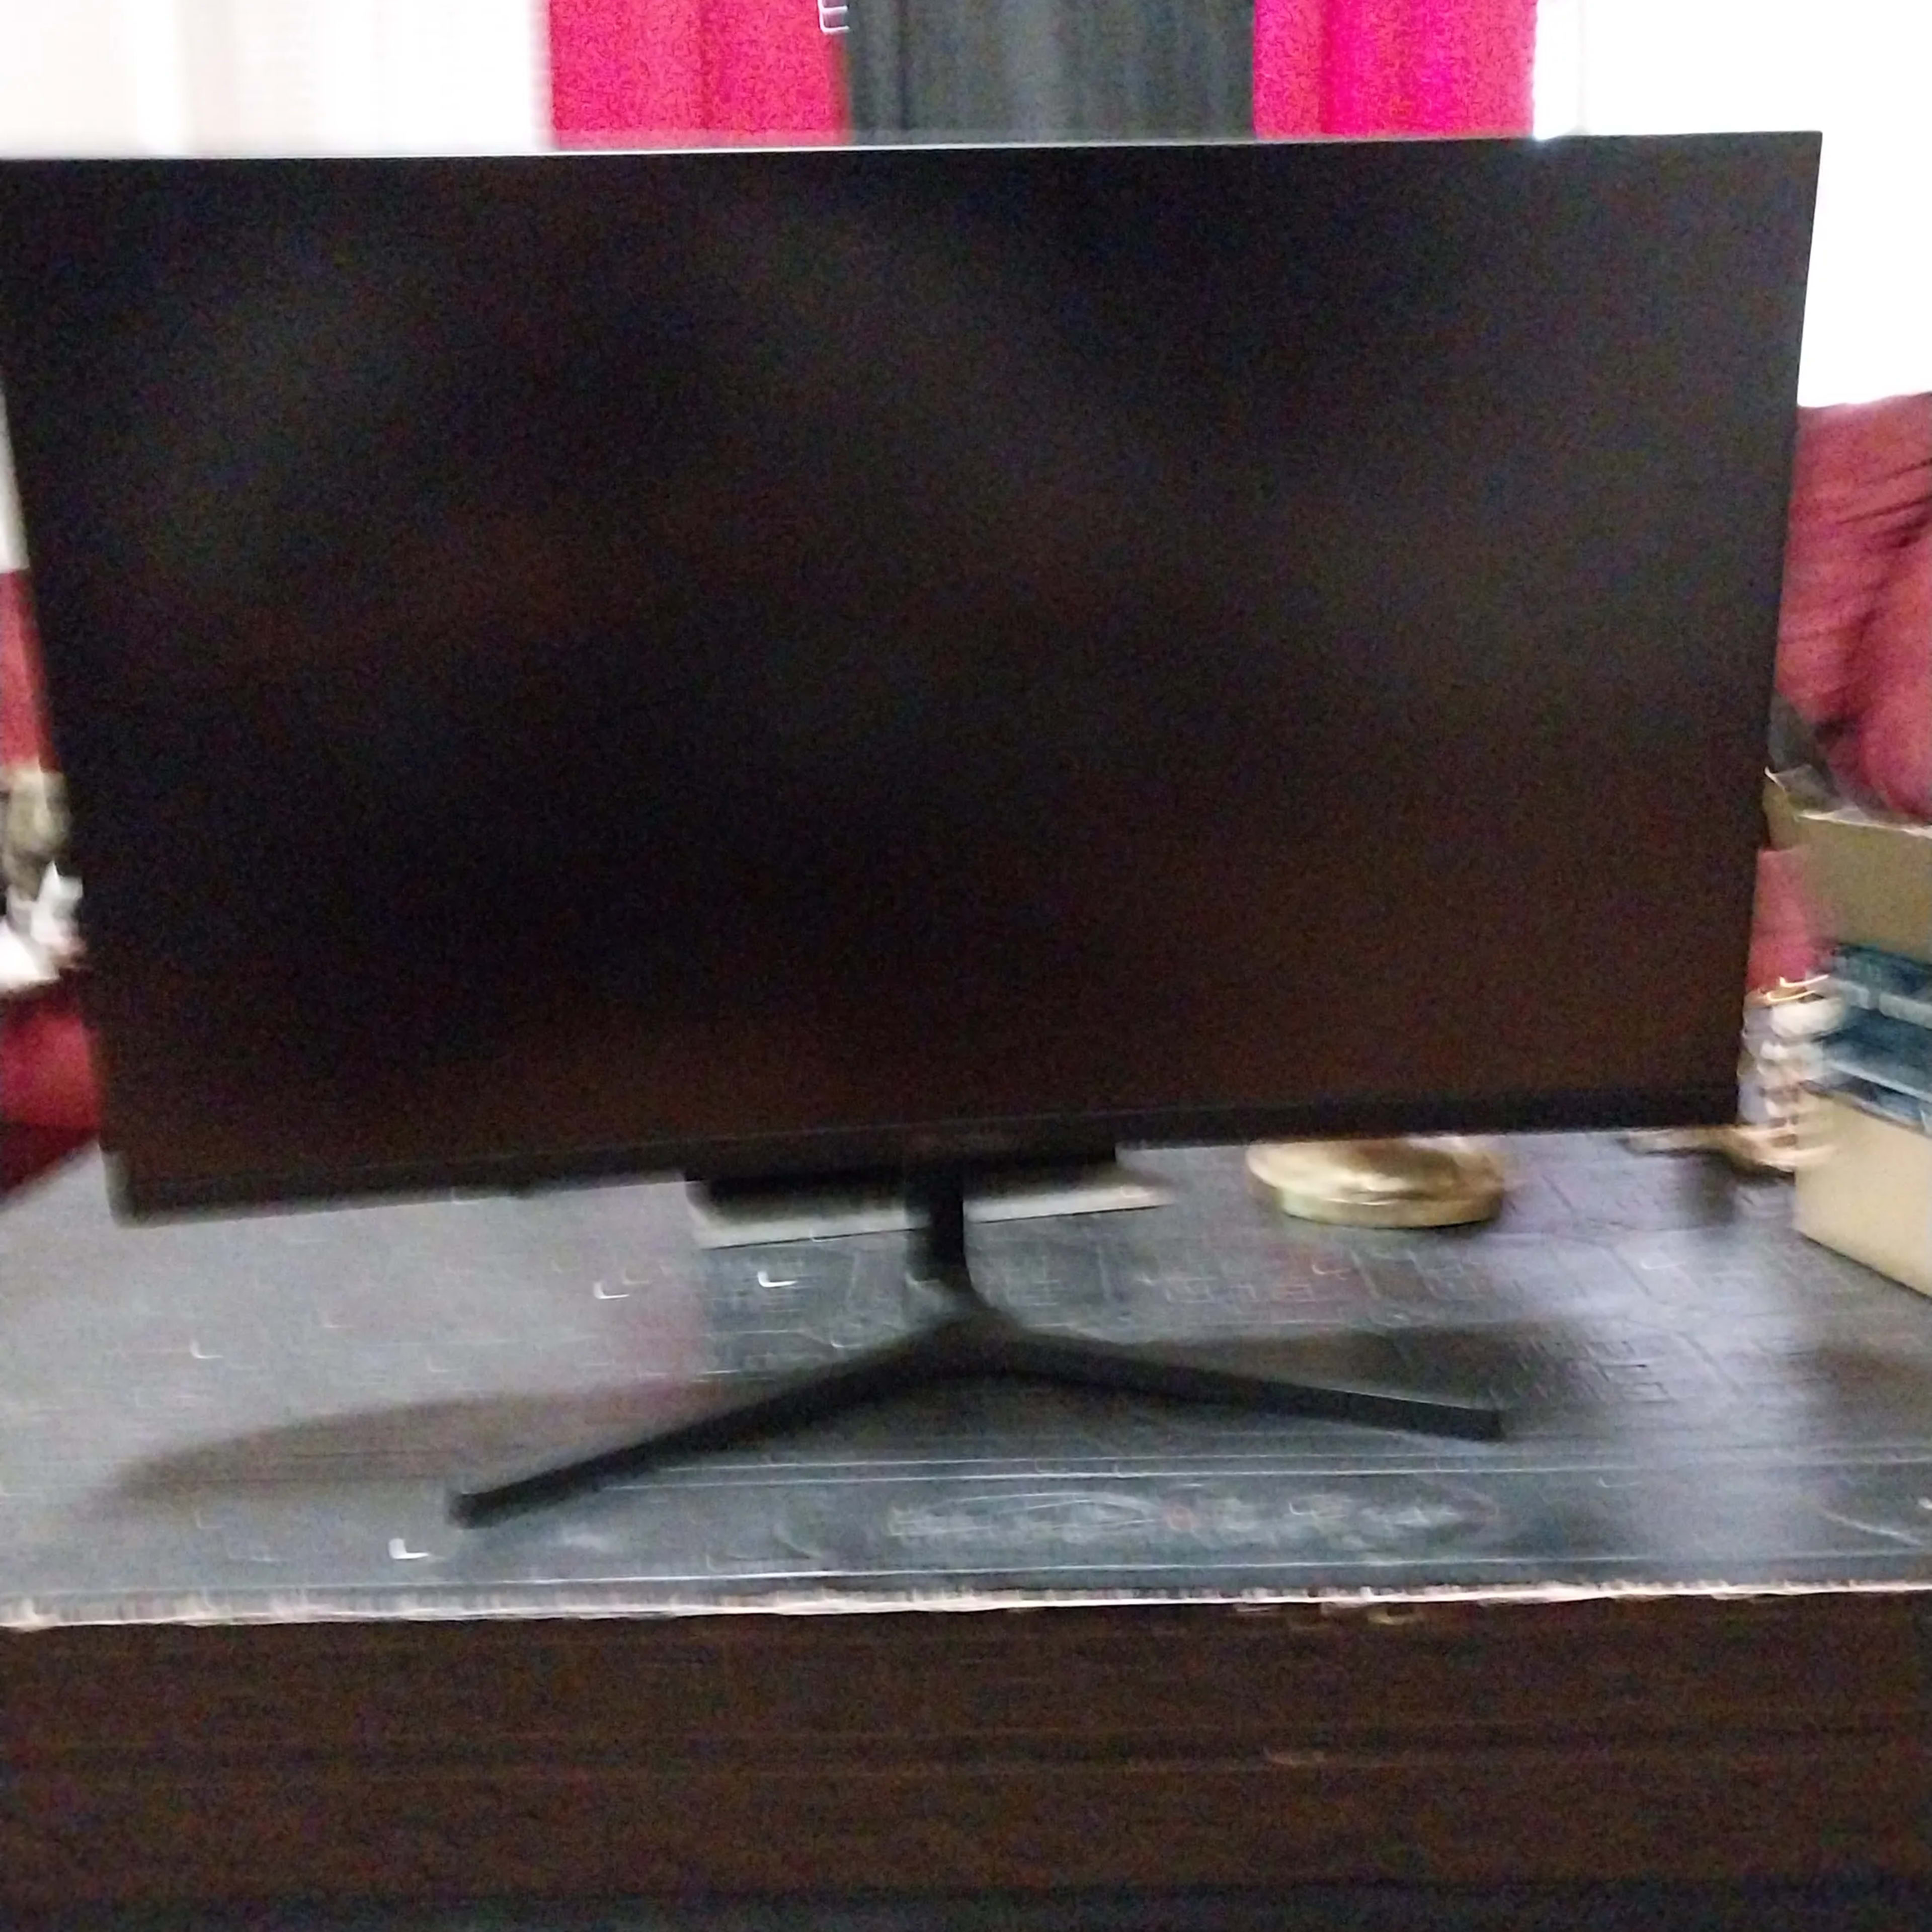 165 hz 24 inch 1080p gaming monitor from crua